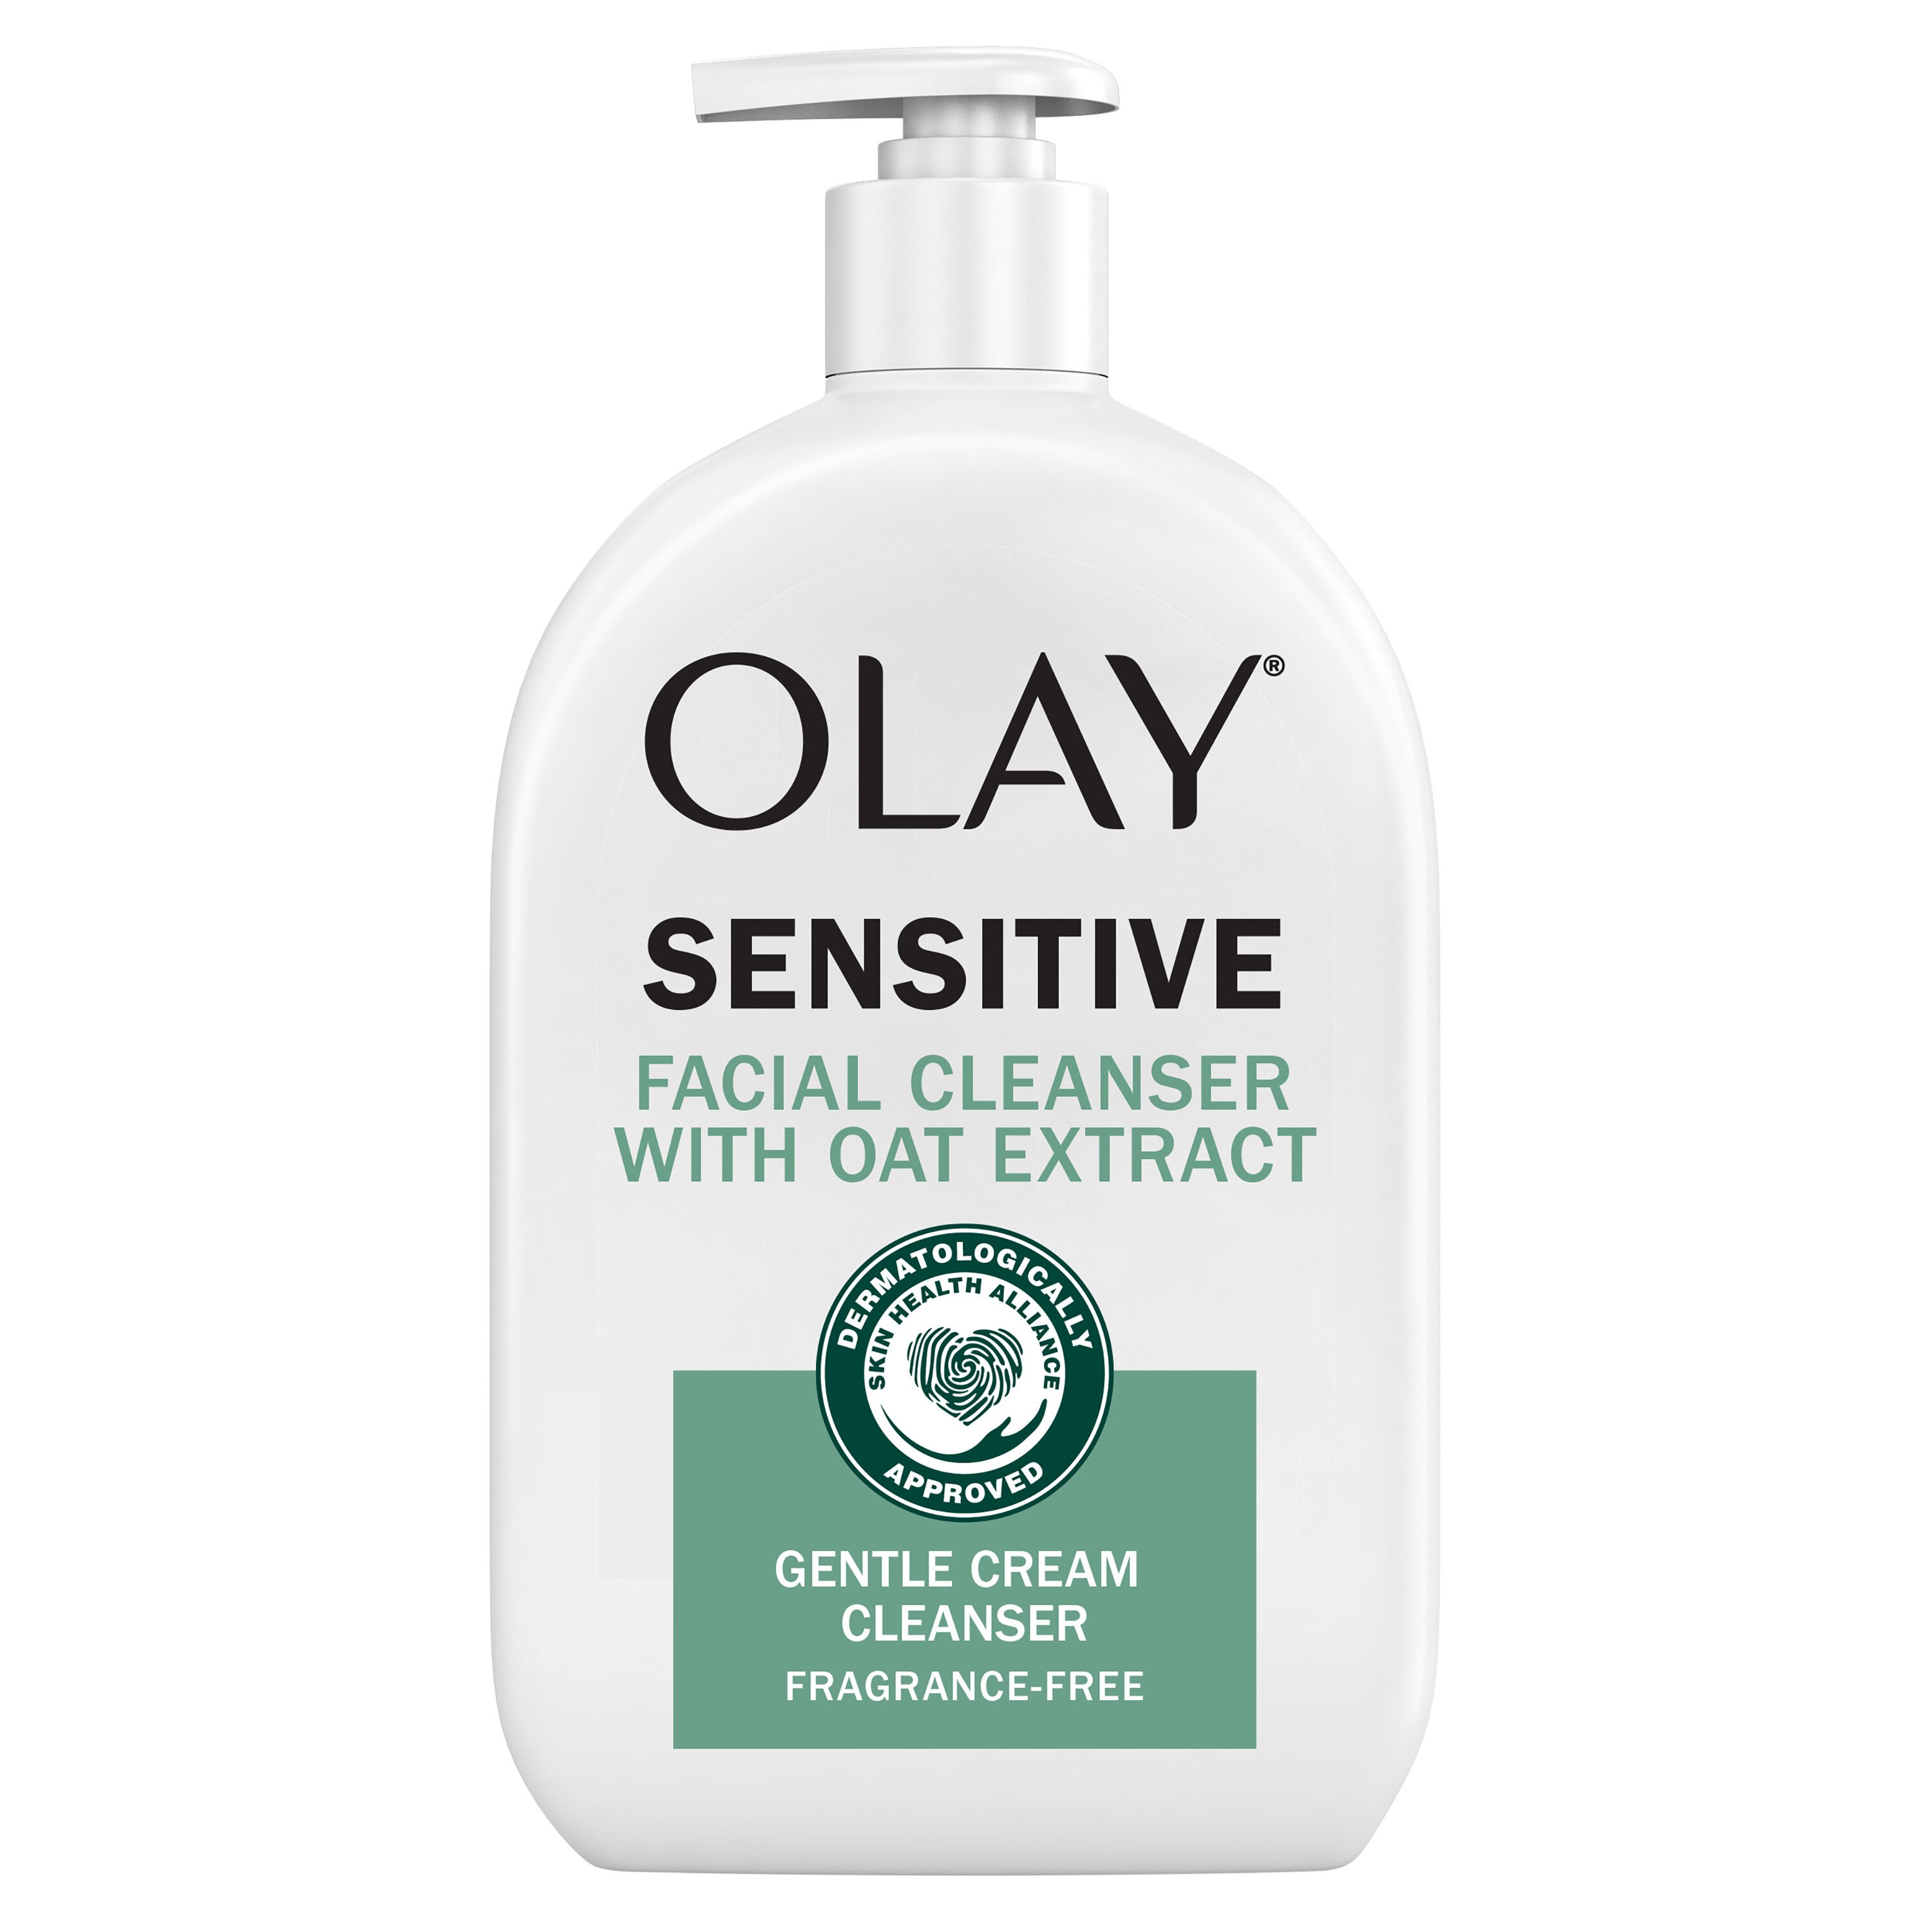 Olay Sensitive Facial Cleanser with Oat Extract, 16 fl oz